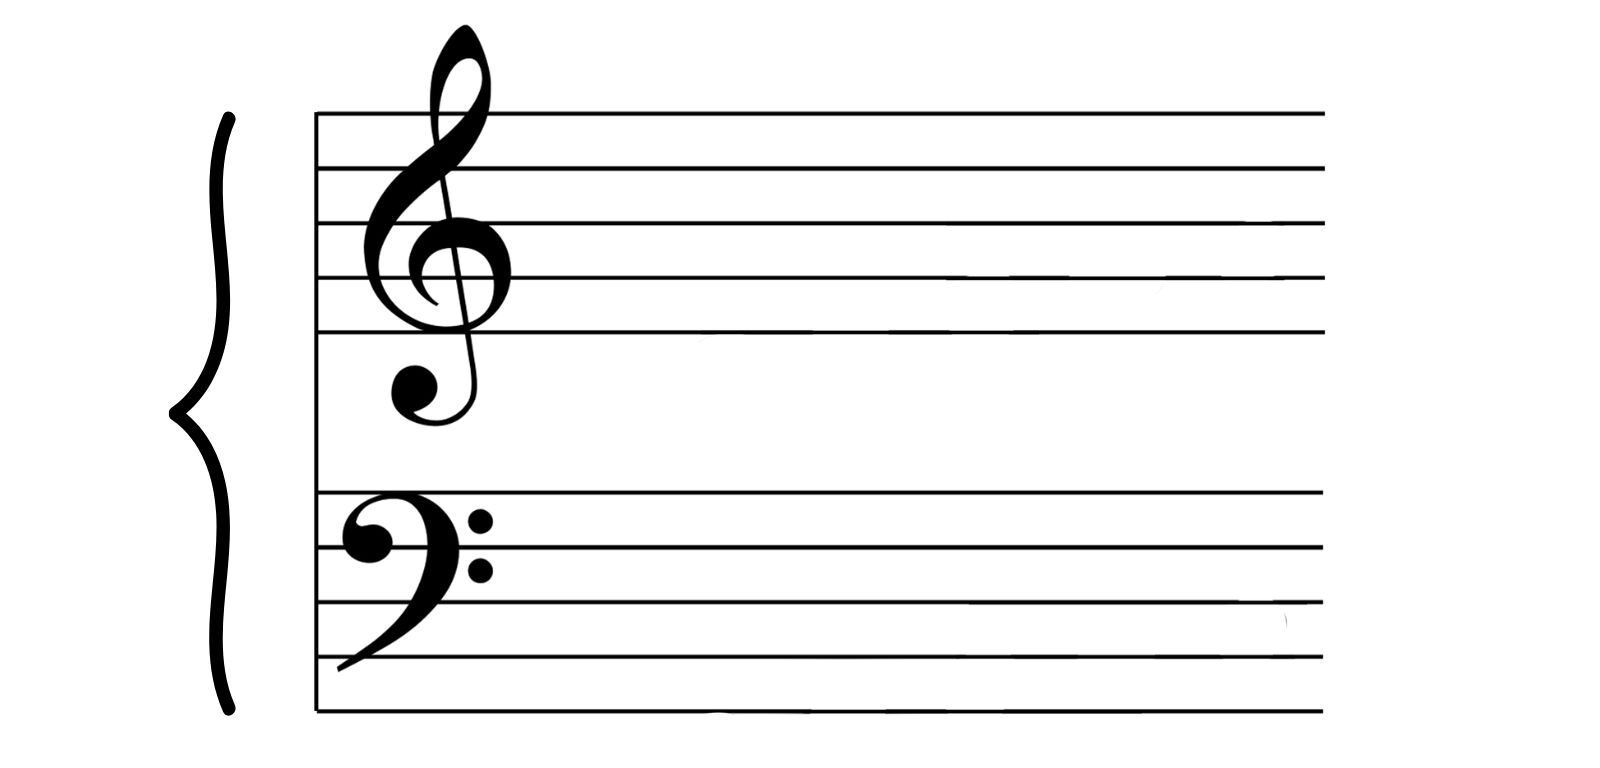 two separate clefs are joined together